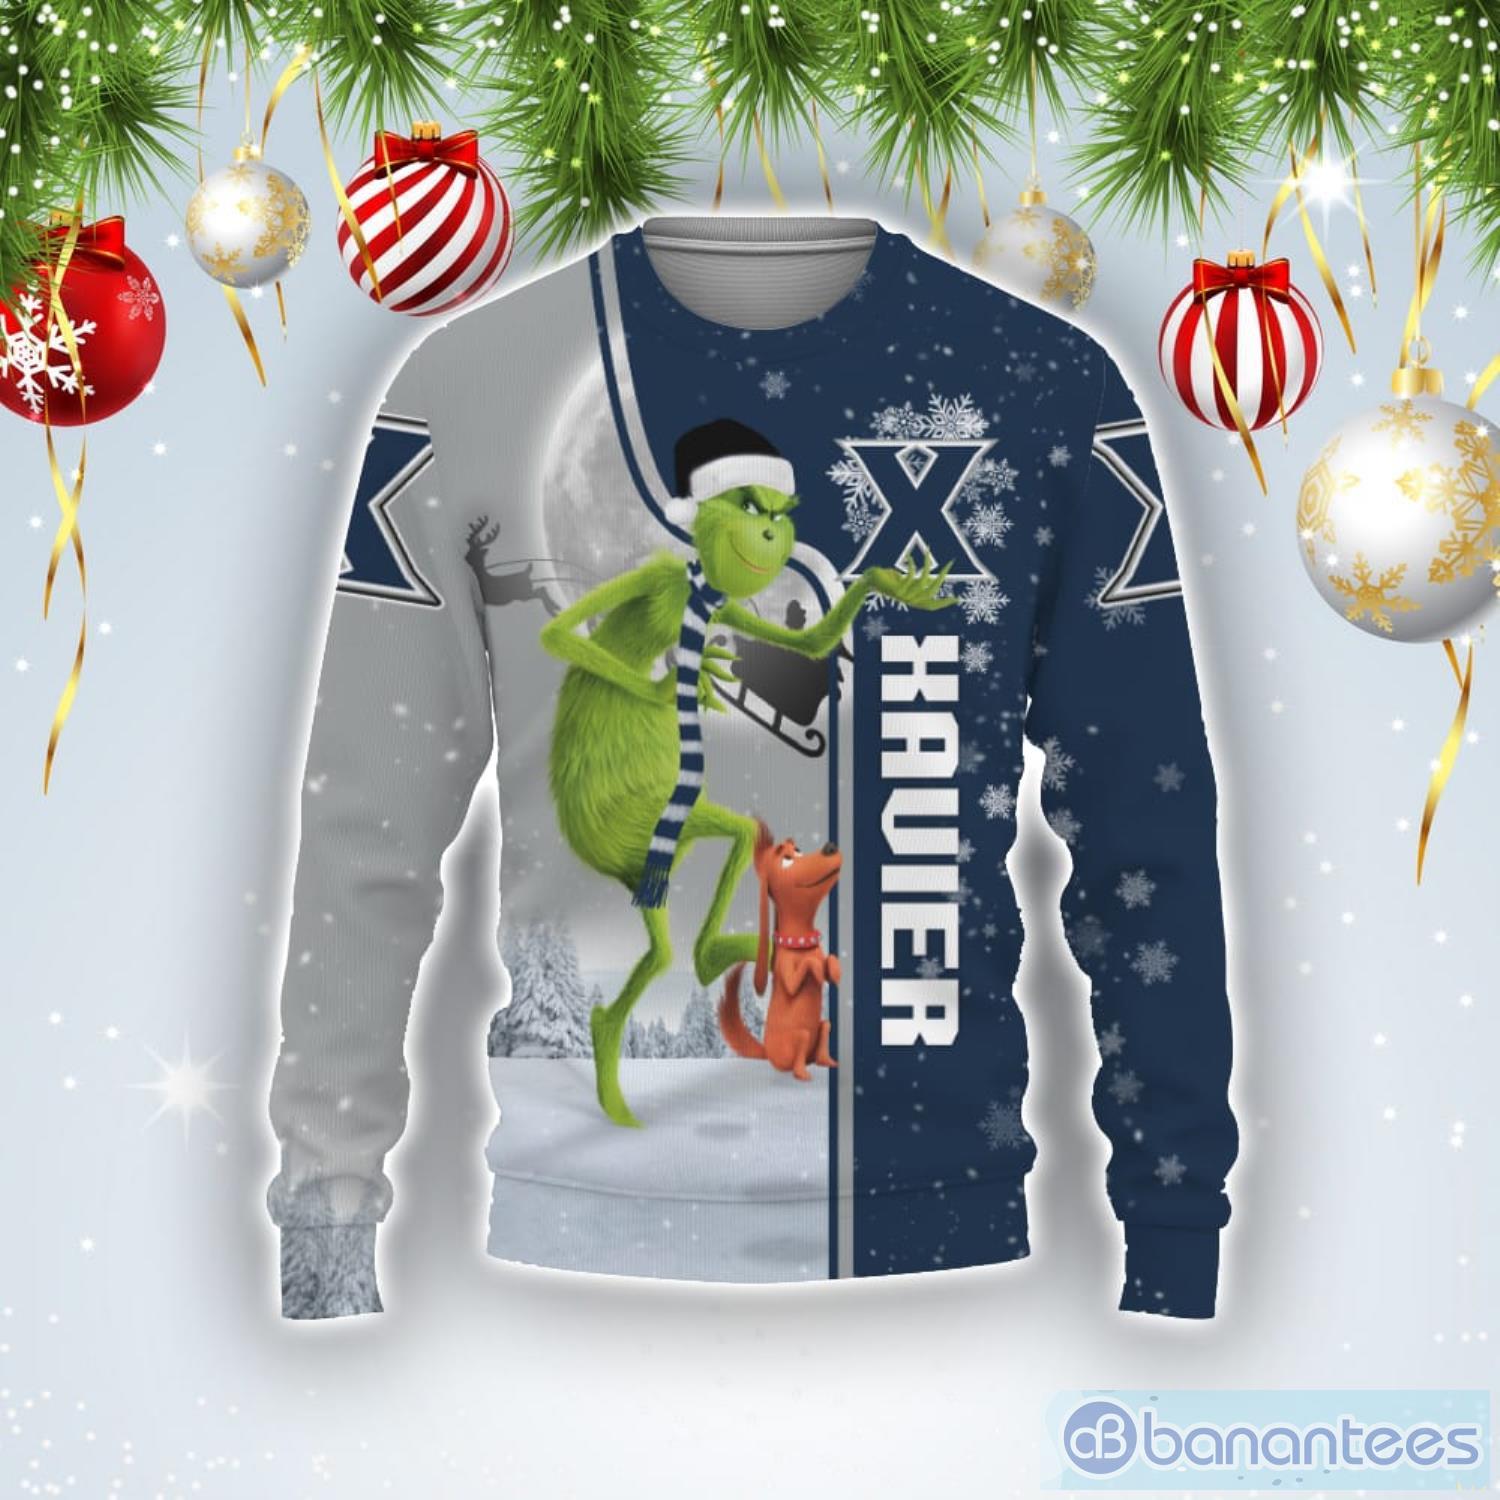 Xavier Musketeers Funny Grinch Ugly Christmas Sweater Product Photo 1